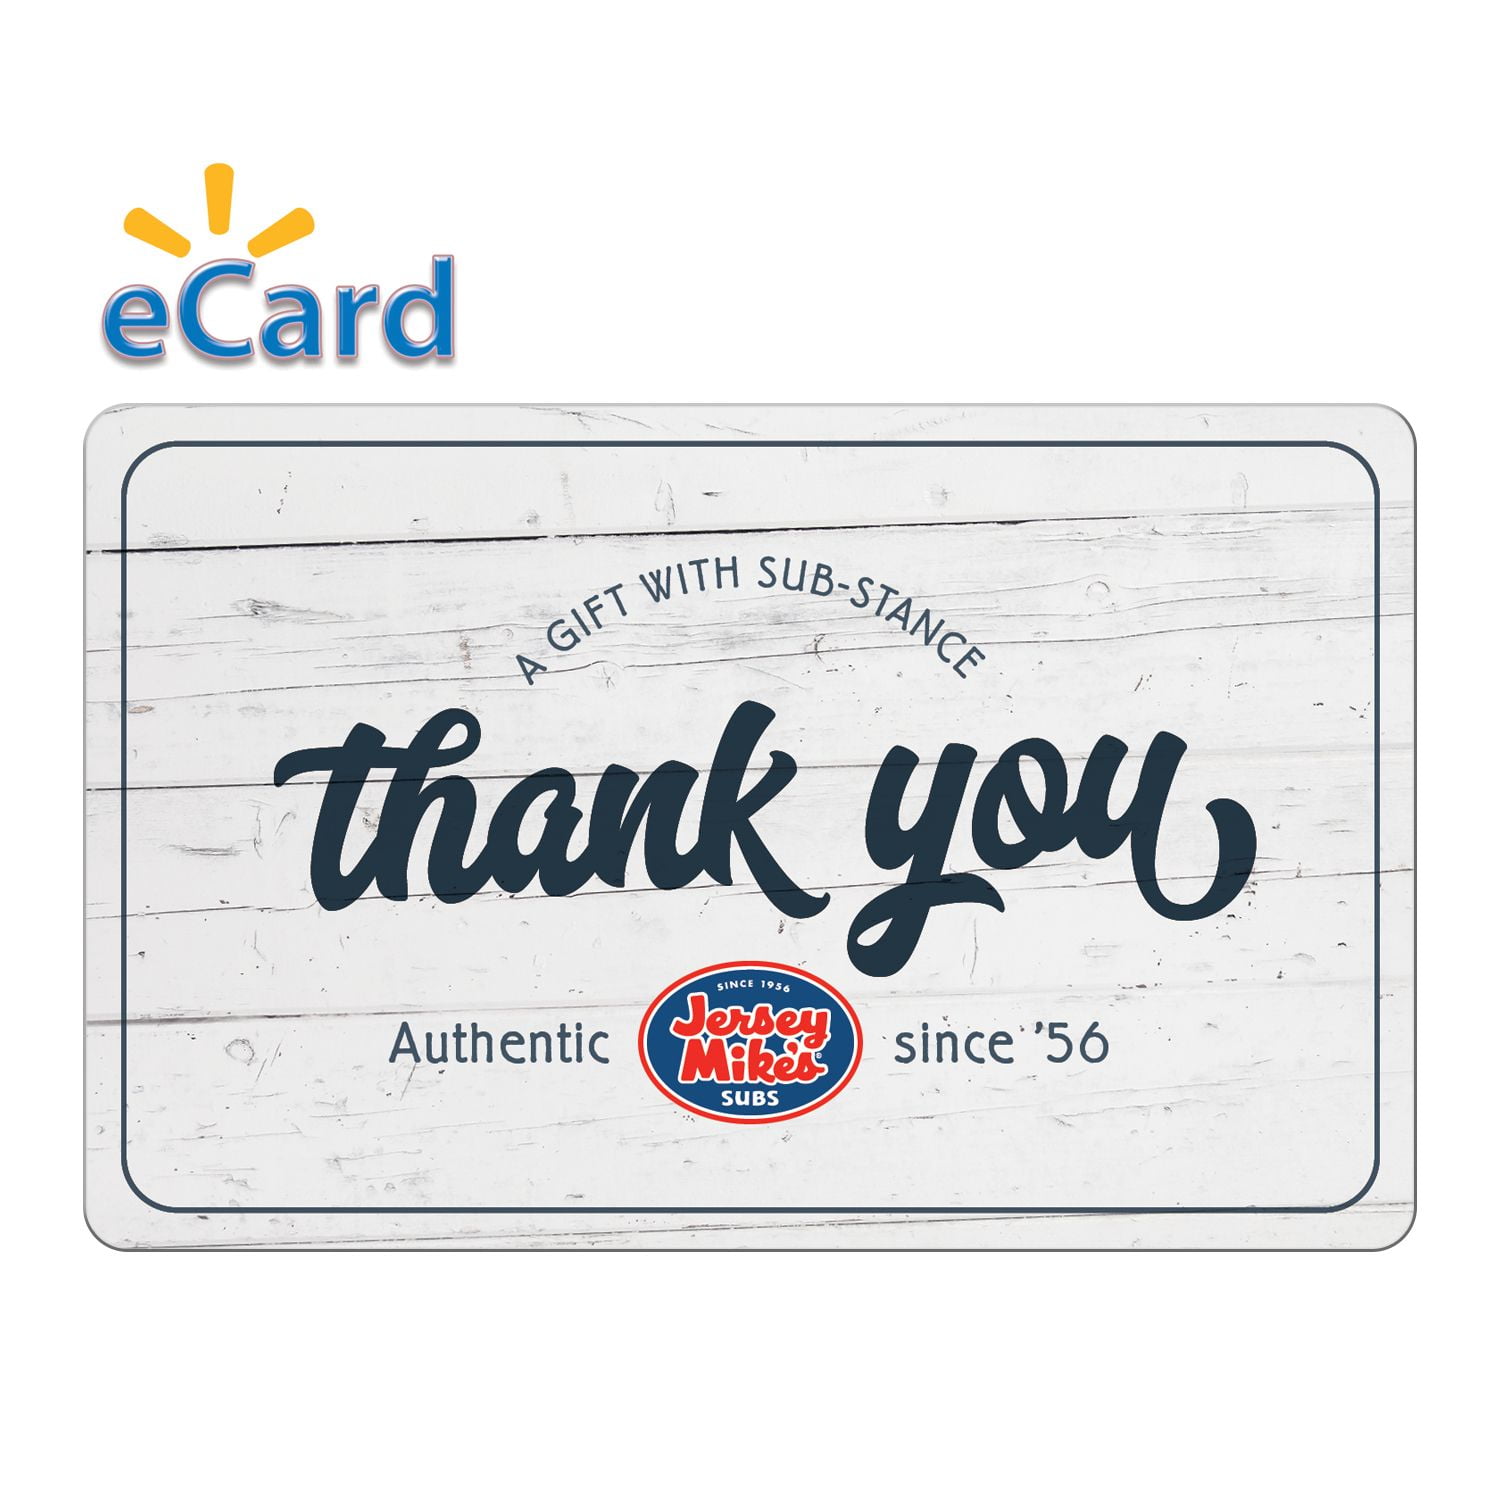 jersey mike's subs gift cards